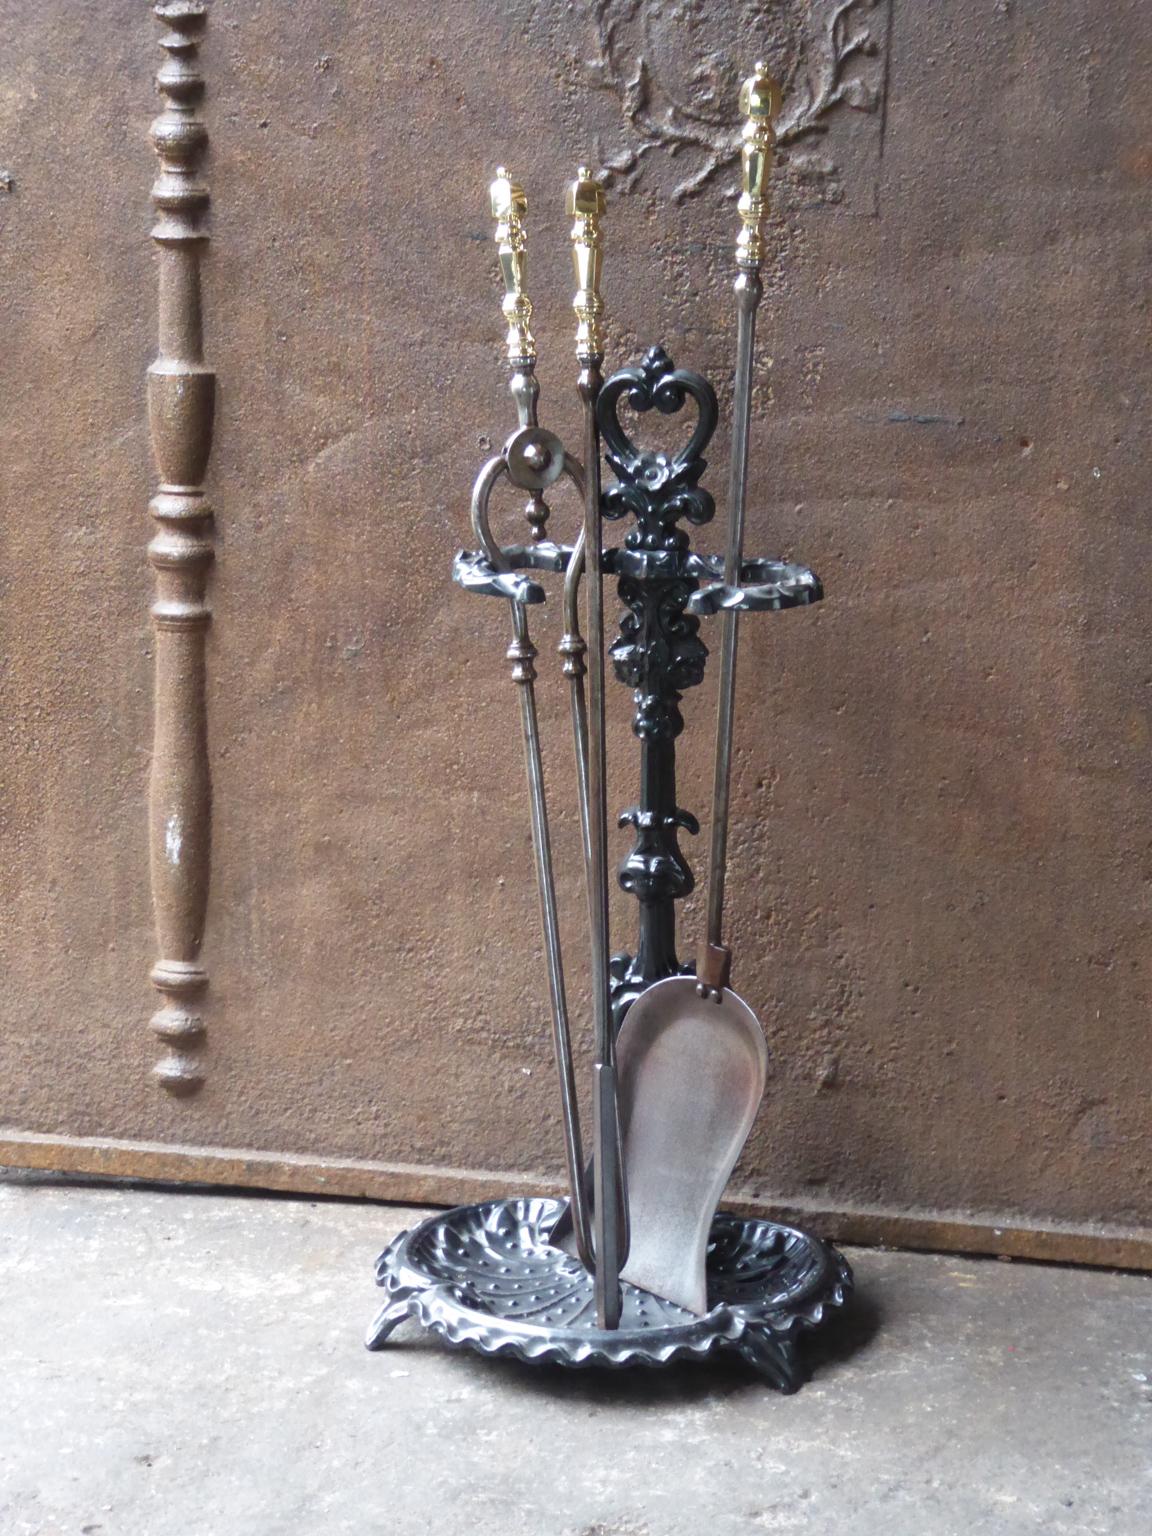 19th century English Victorian fireplace toolset consisting of a stand with three tools. The tools are made of wrought iron with polished brass handles. The stand is made of cast iron. The condition is good.













 